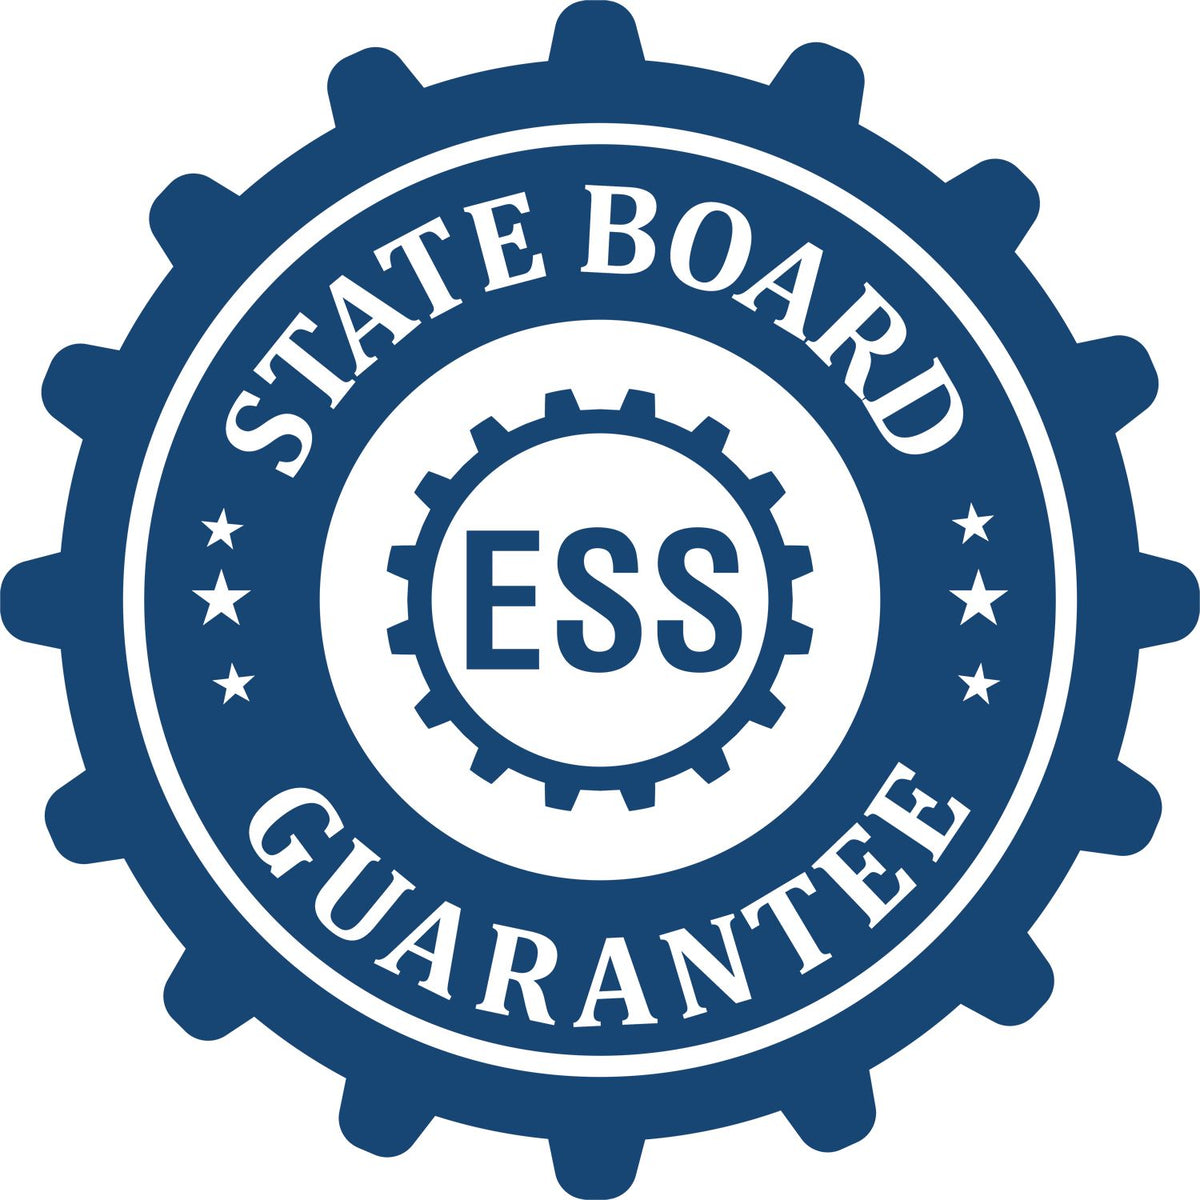 An emblem in a gear shape illustrating a state board guarantee for the Hybrid Connecticut Geologist Seal